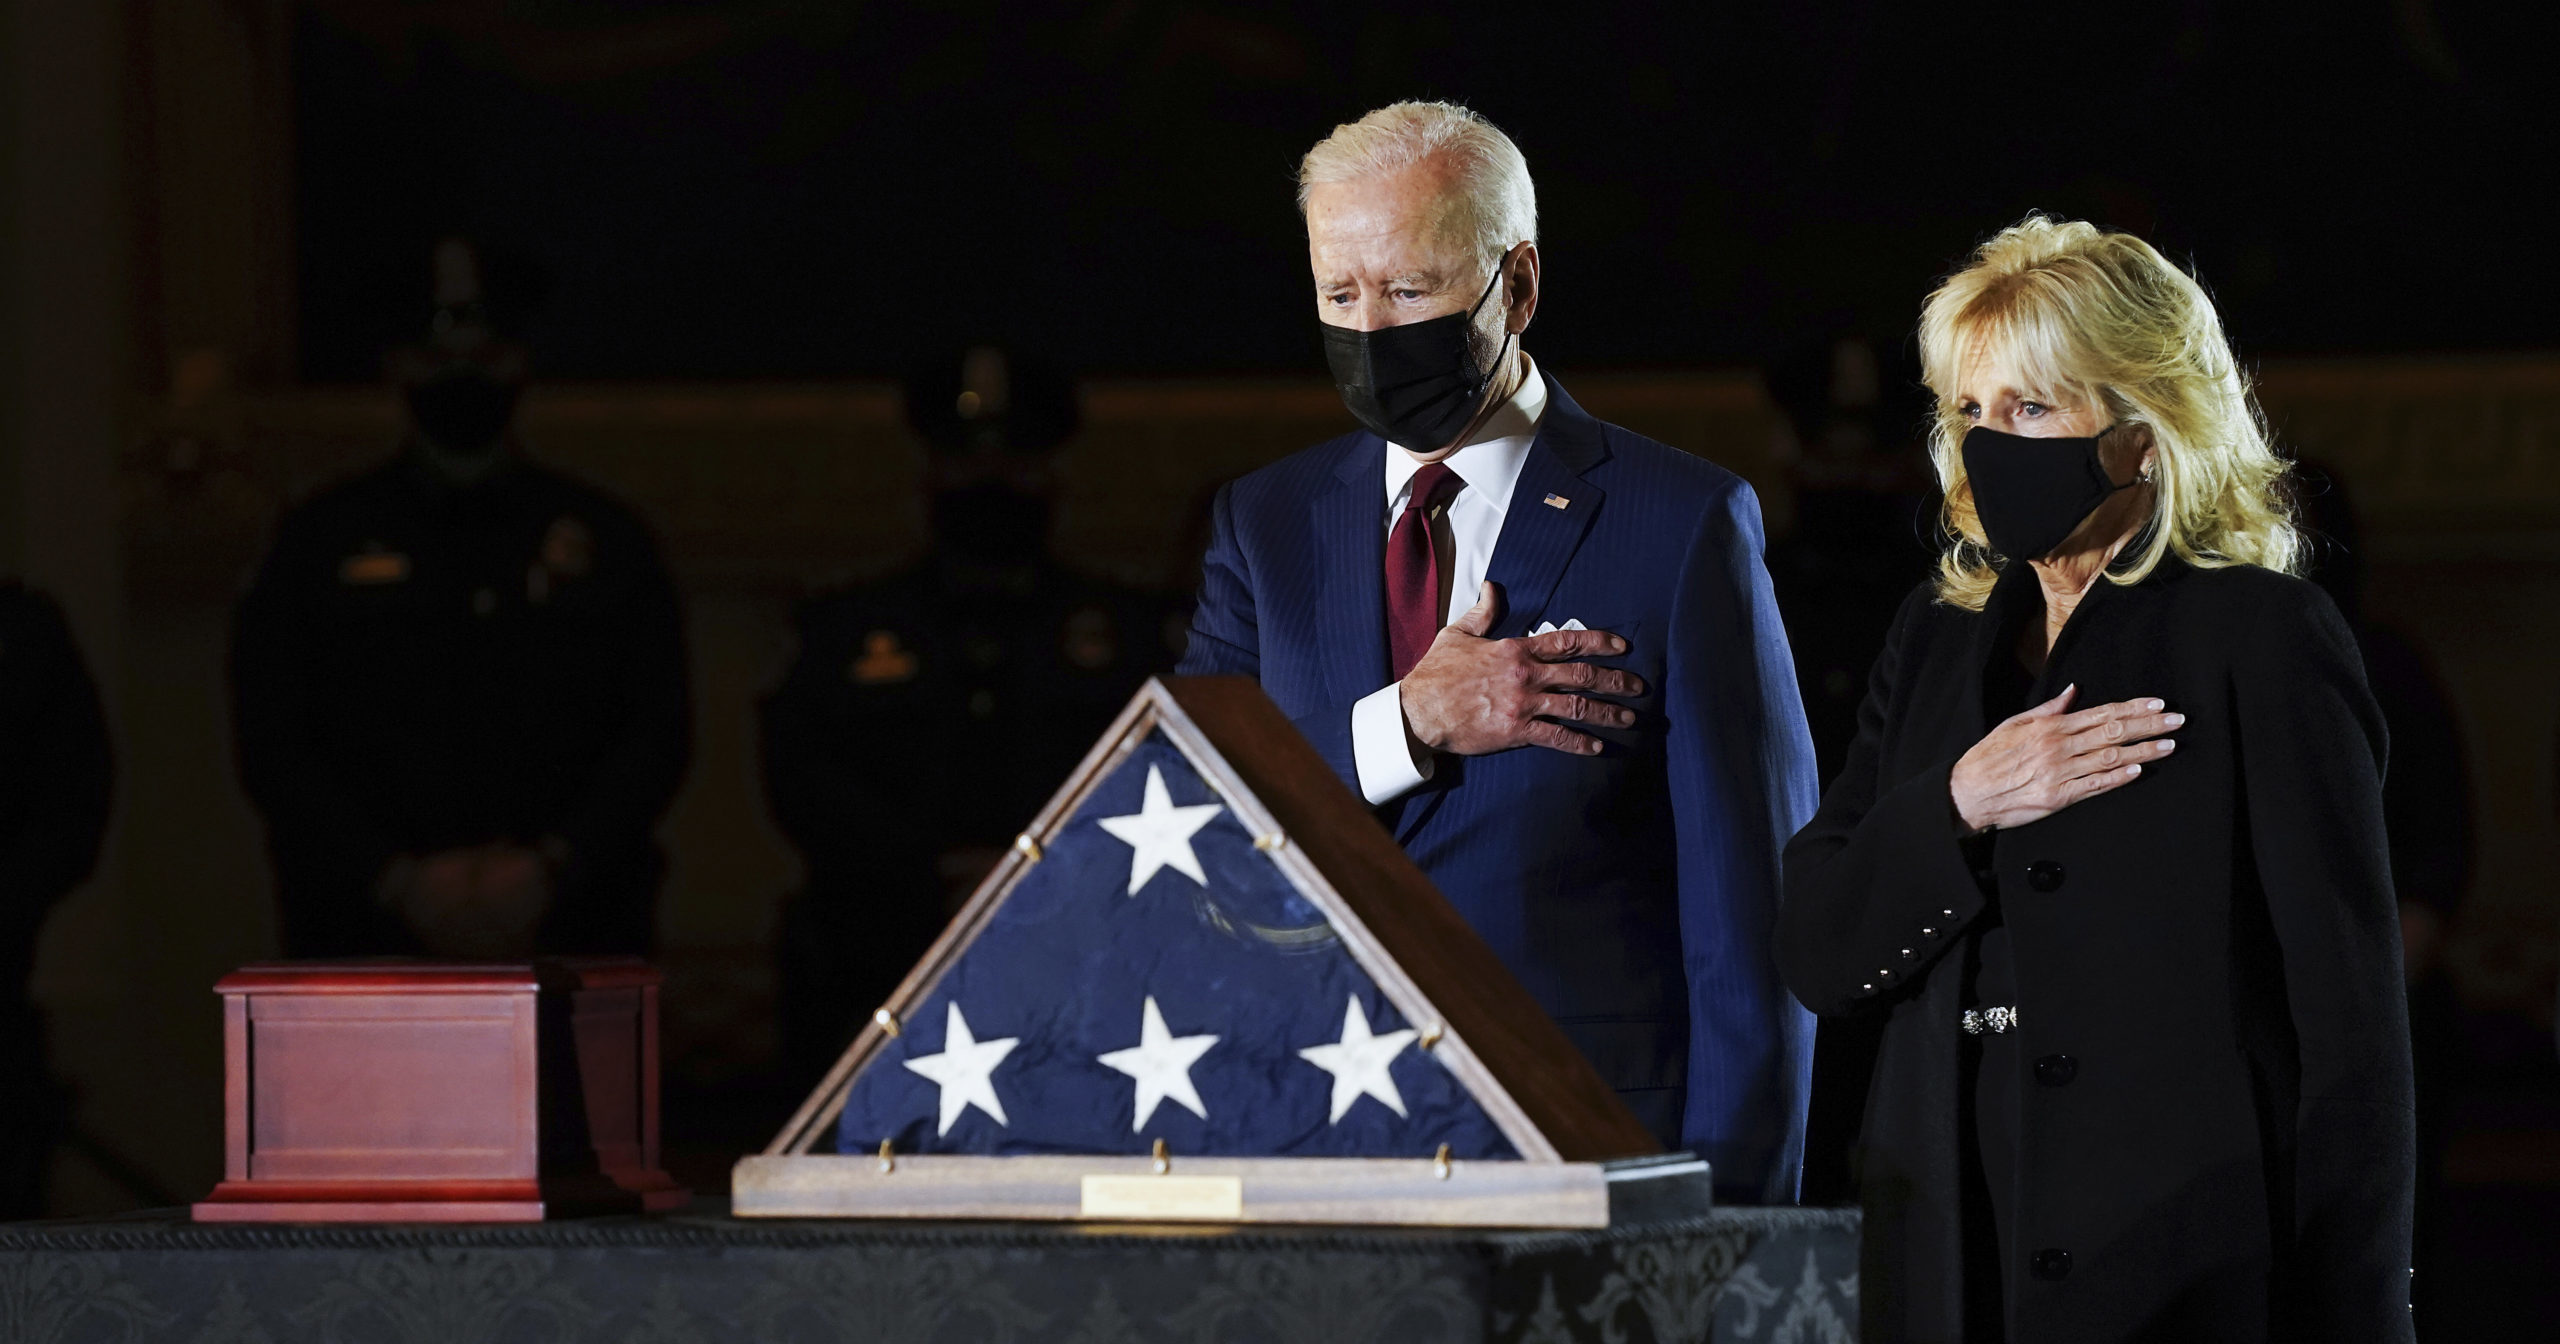 President Joe Biden and first lady Jill Biden pay their respects to the late US Capitol police officer Brian Sicknick at the Capitol Rotunda on Feb. 2, 2021, in Washington, D.C.